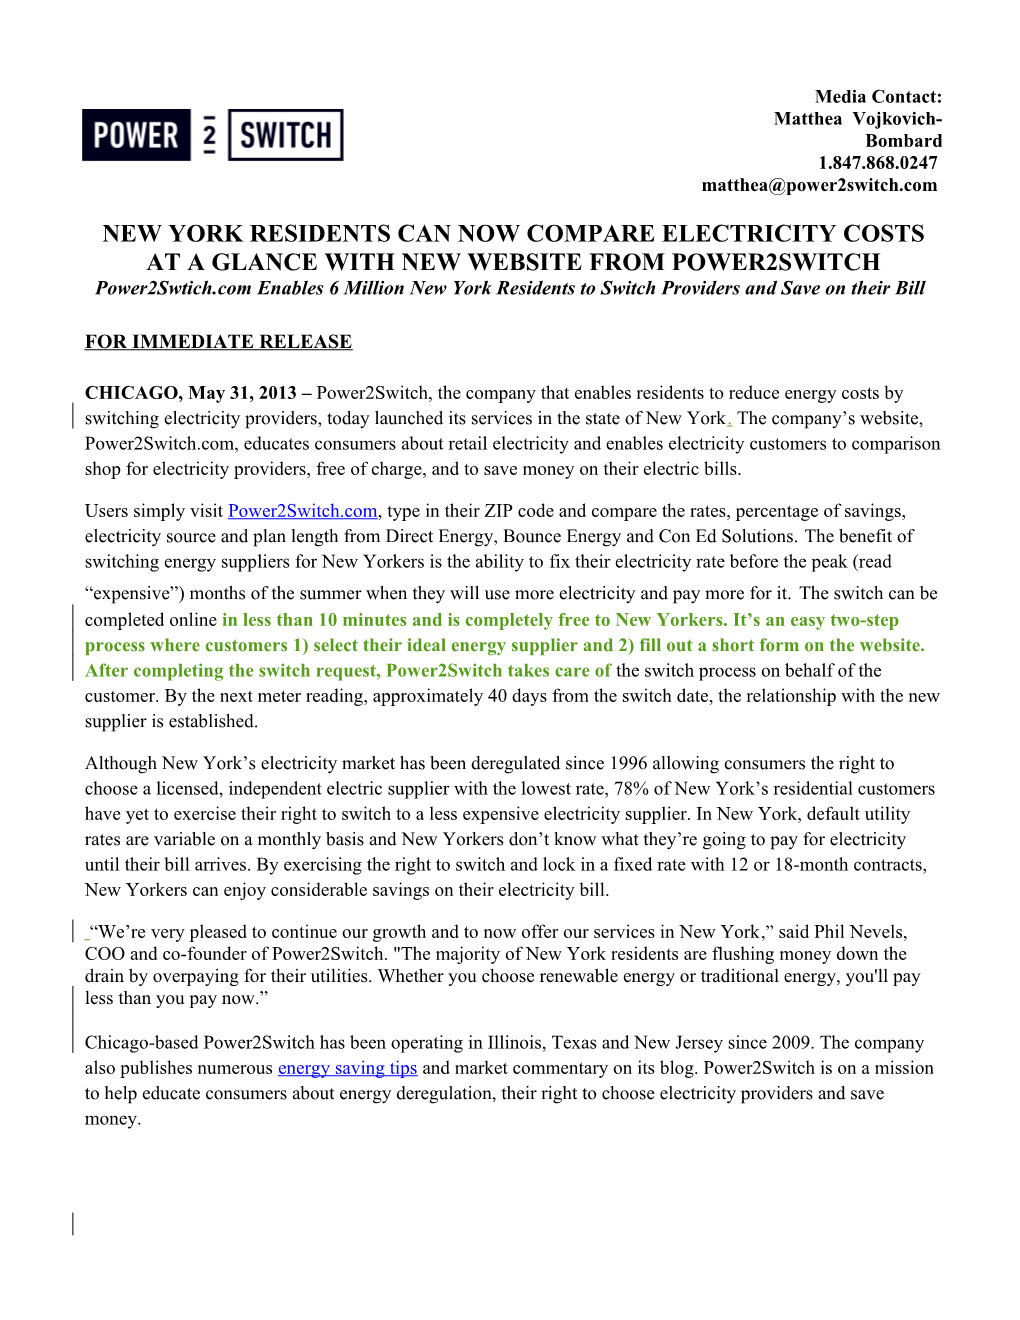 Power2swtich.Comenables6 Million New York Residents to Switch Providersandsave on Their Bill